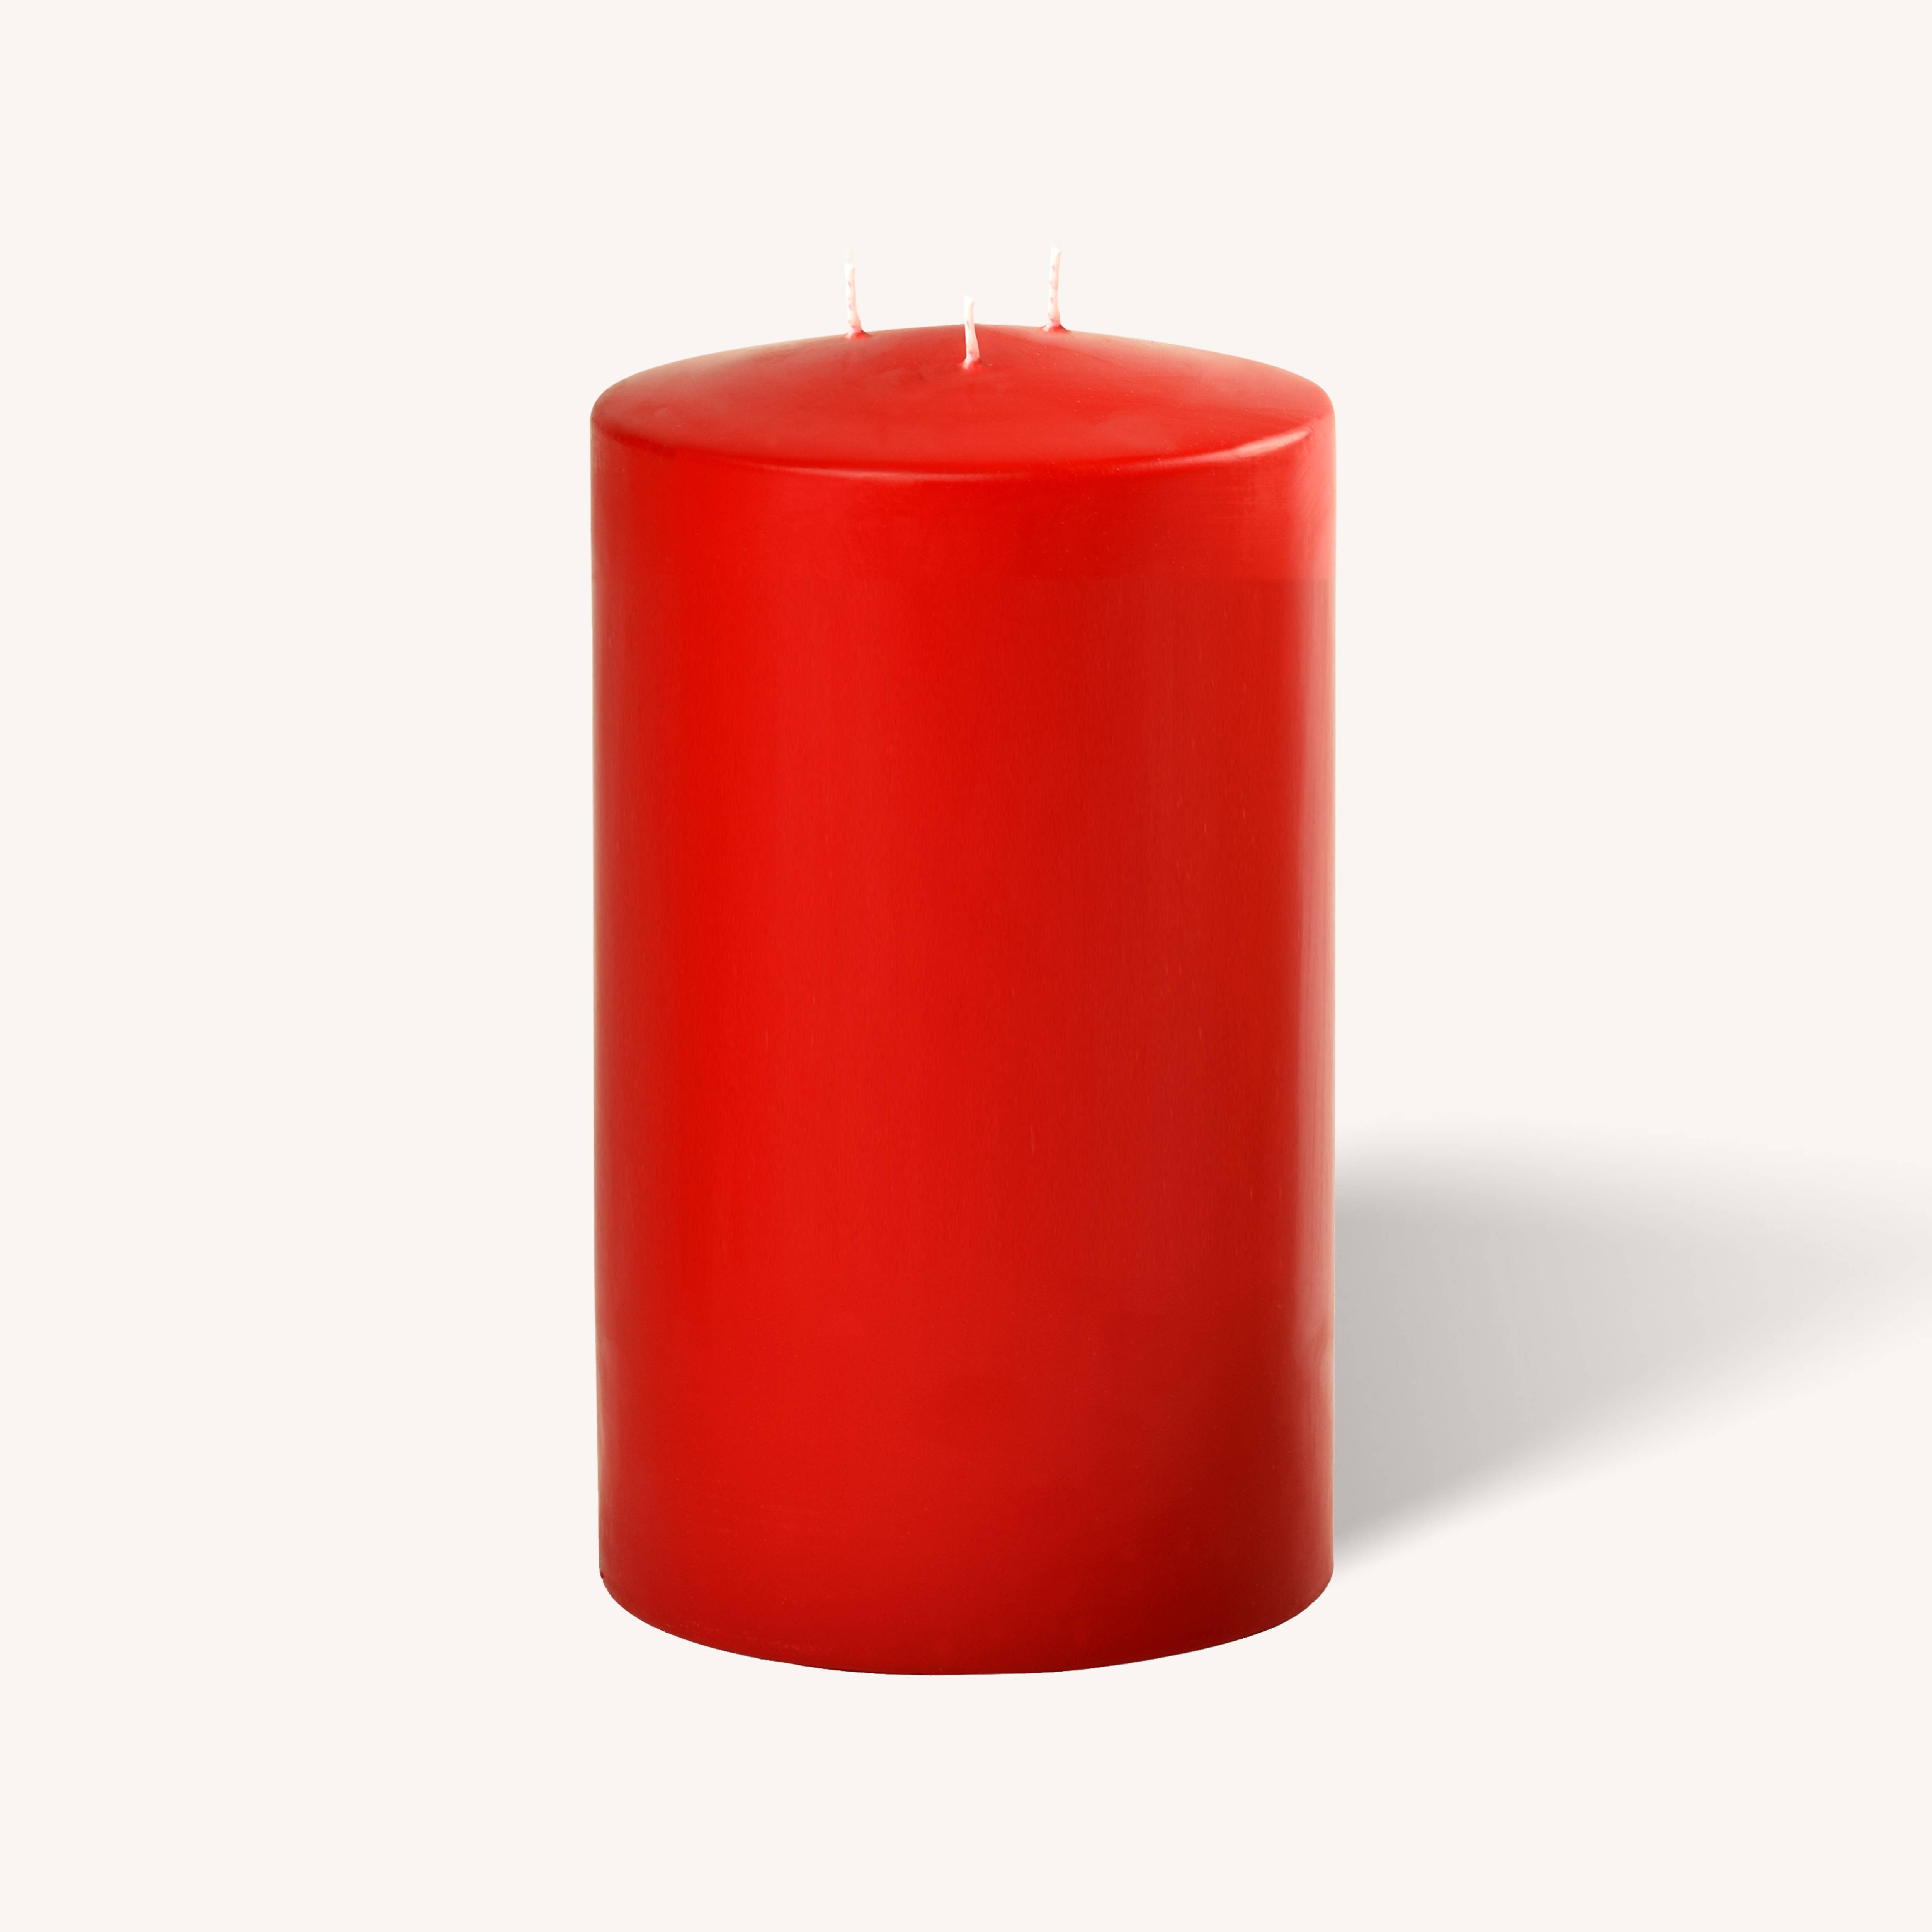 Red 3 Wick Pillar Candles - 4.75" x 8"